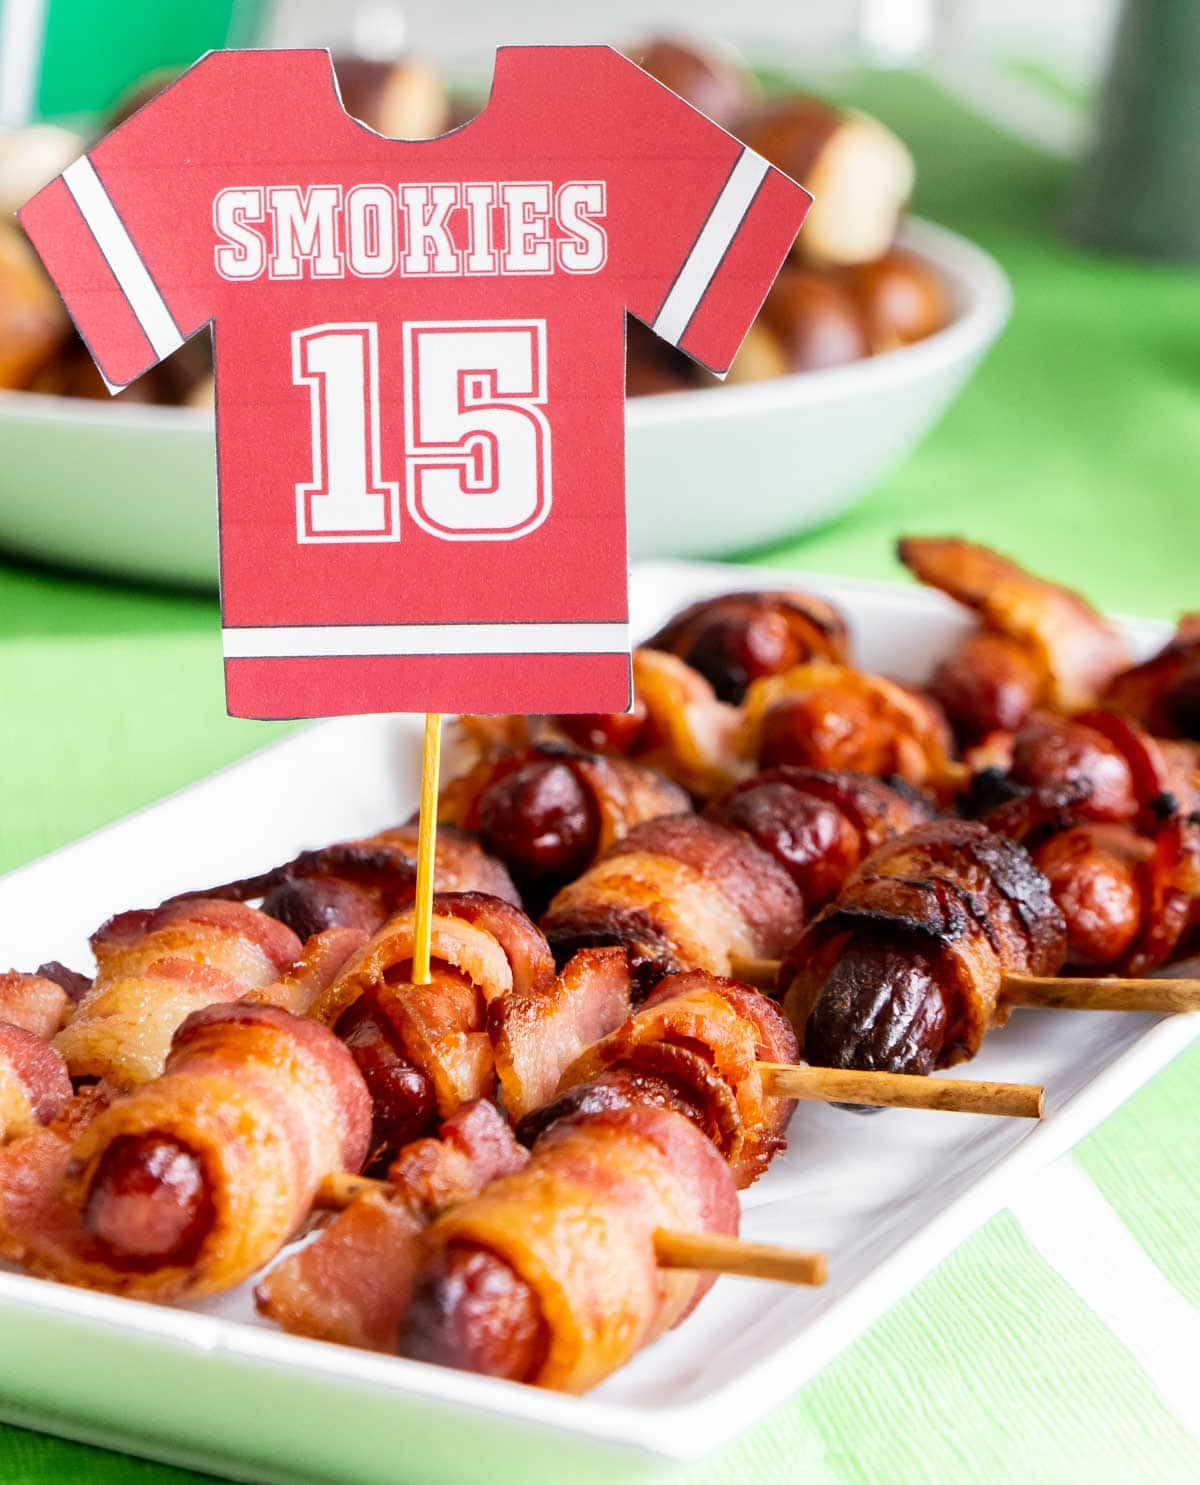 Bacon wrapped smokies on a plate